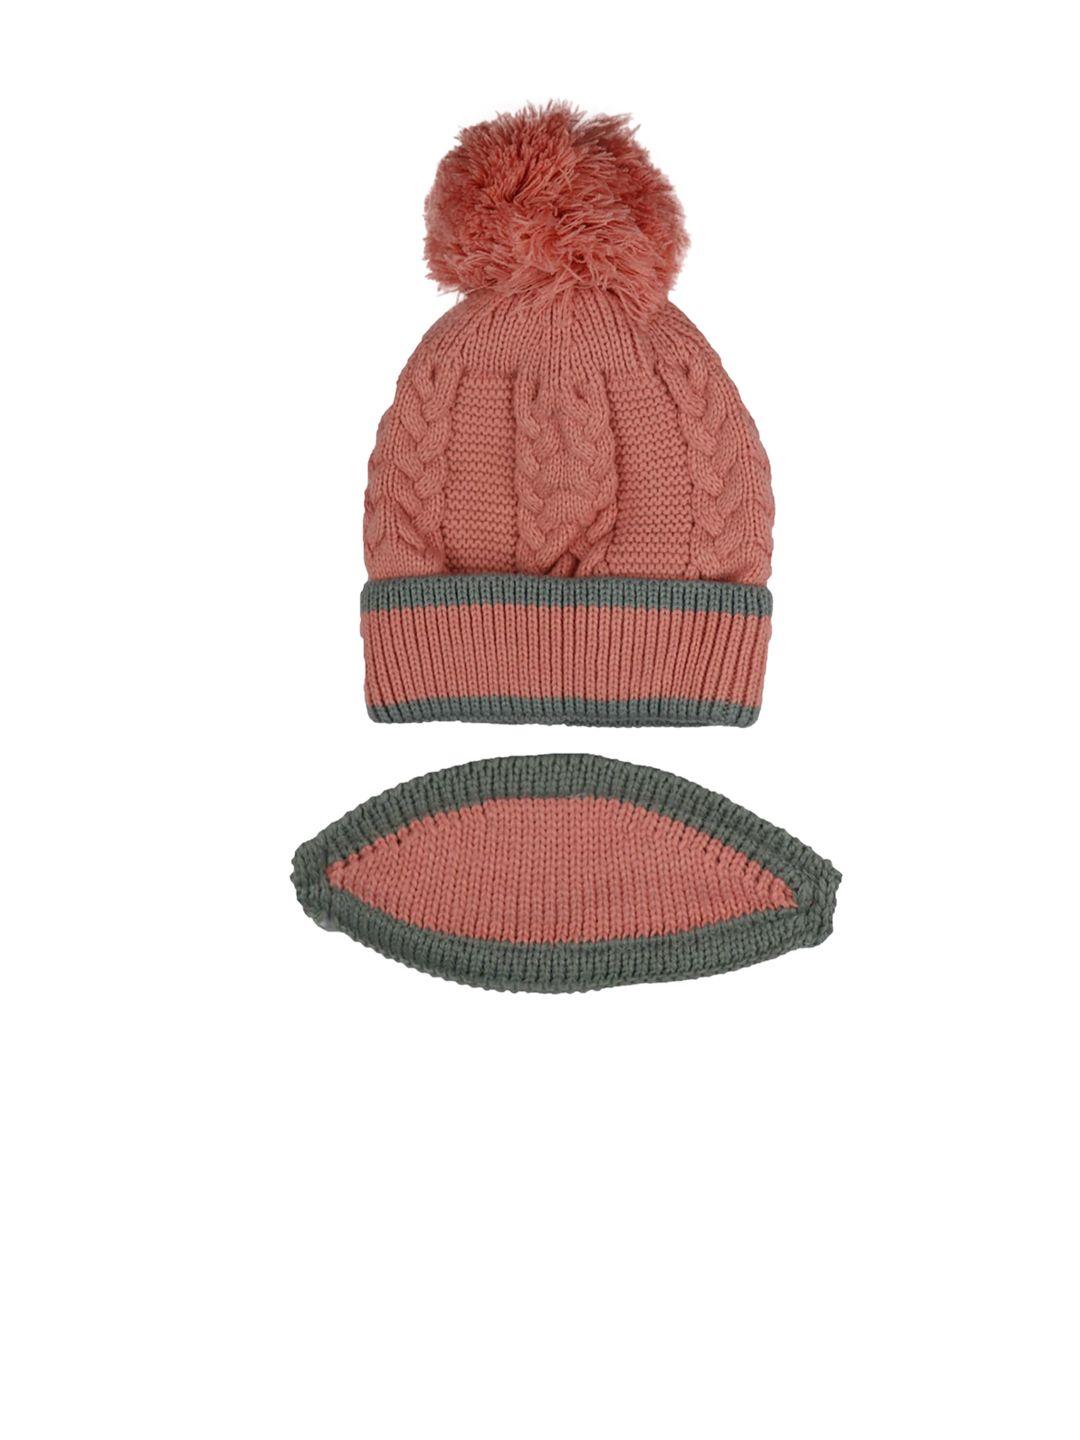 isweven unisex pink self-design woven expandable beanie